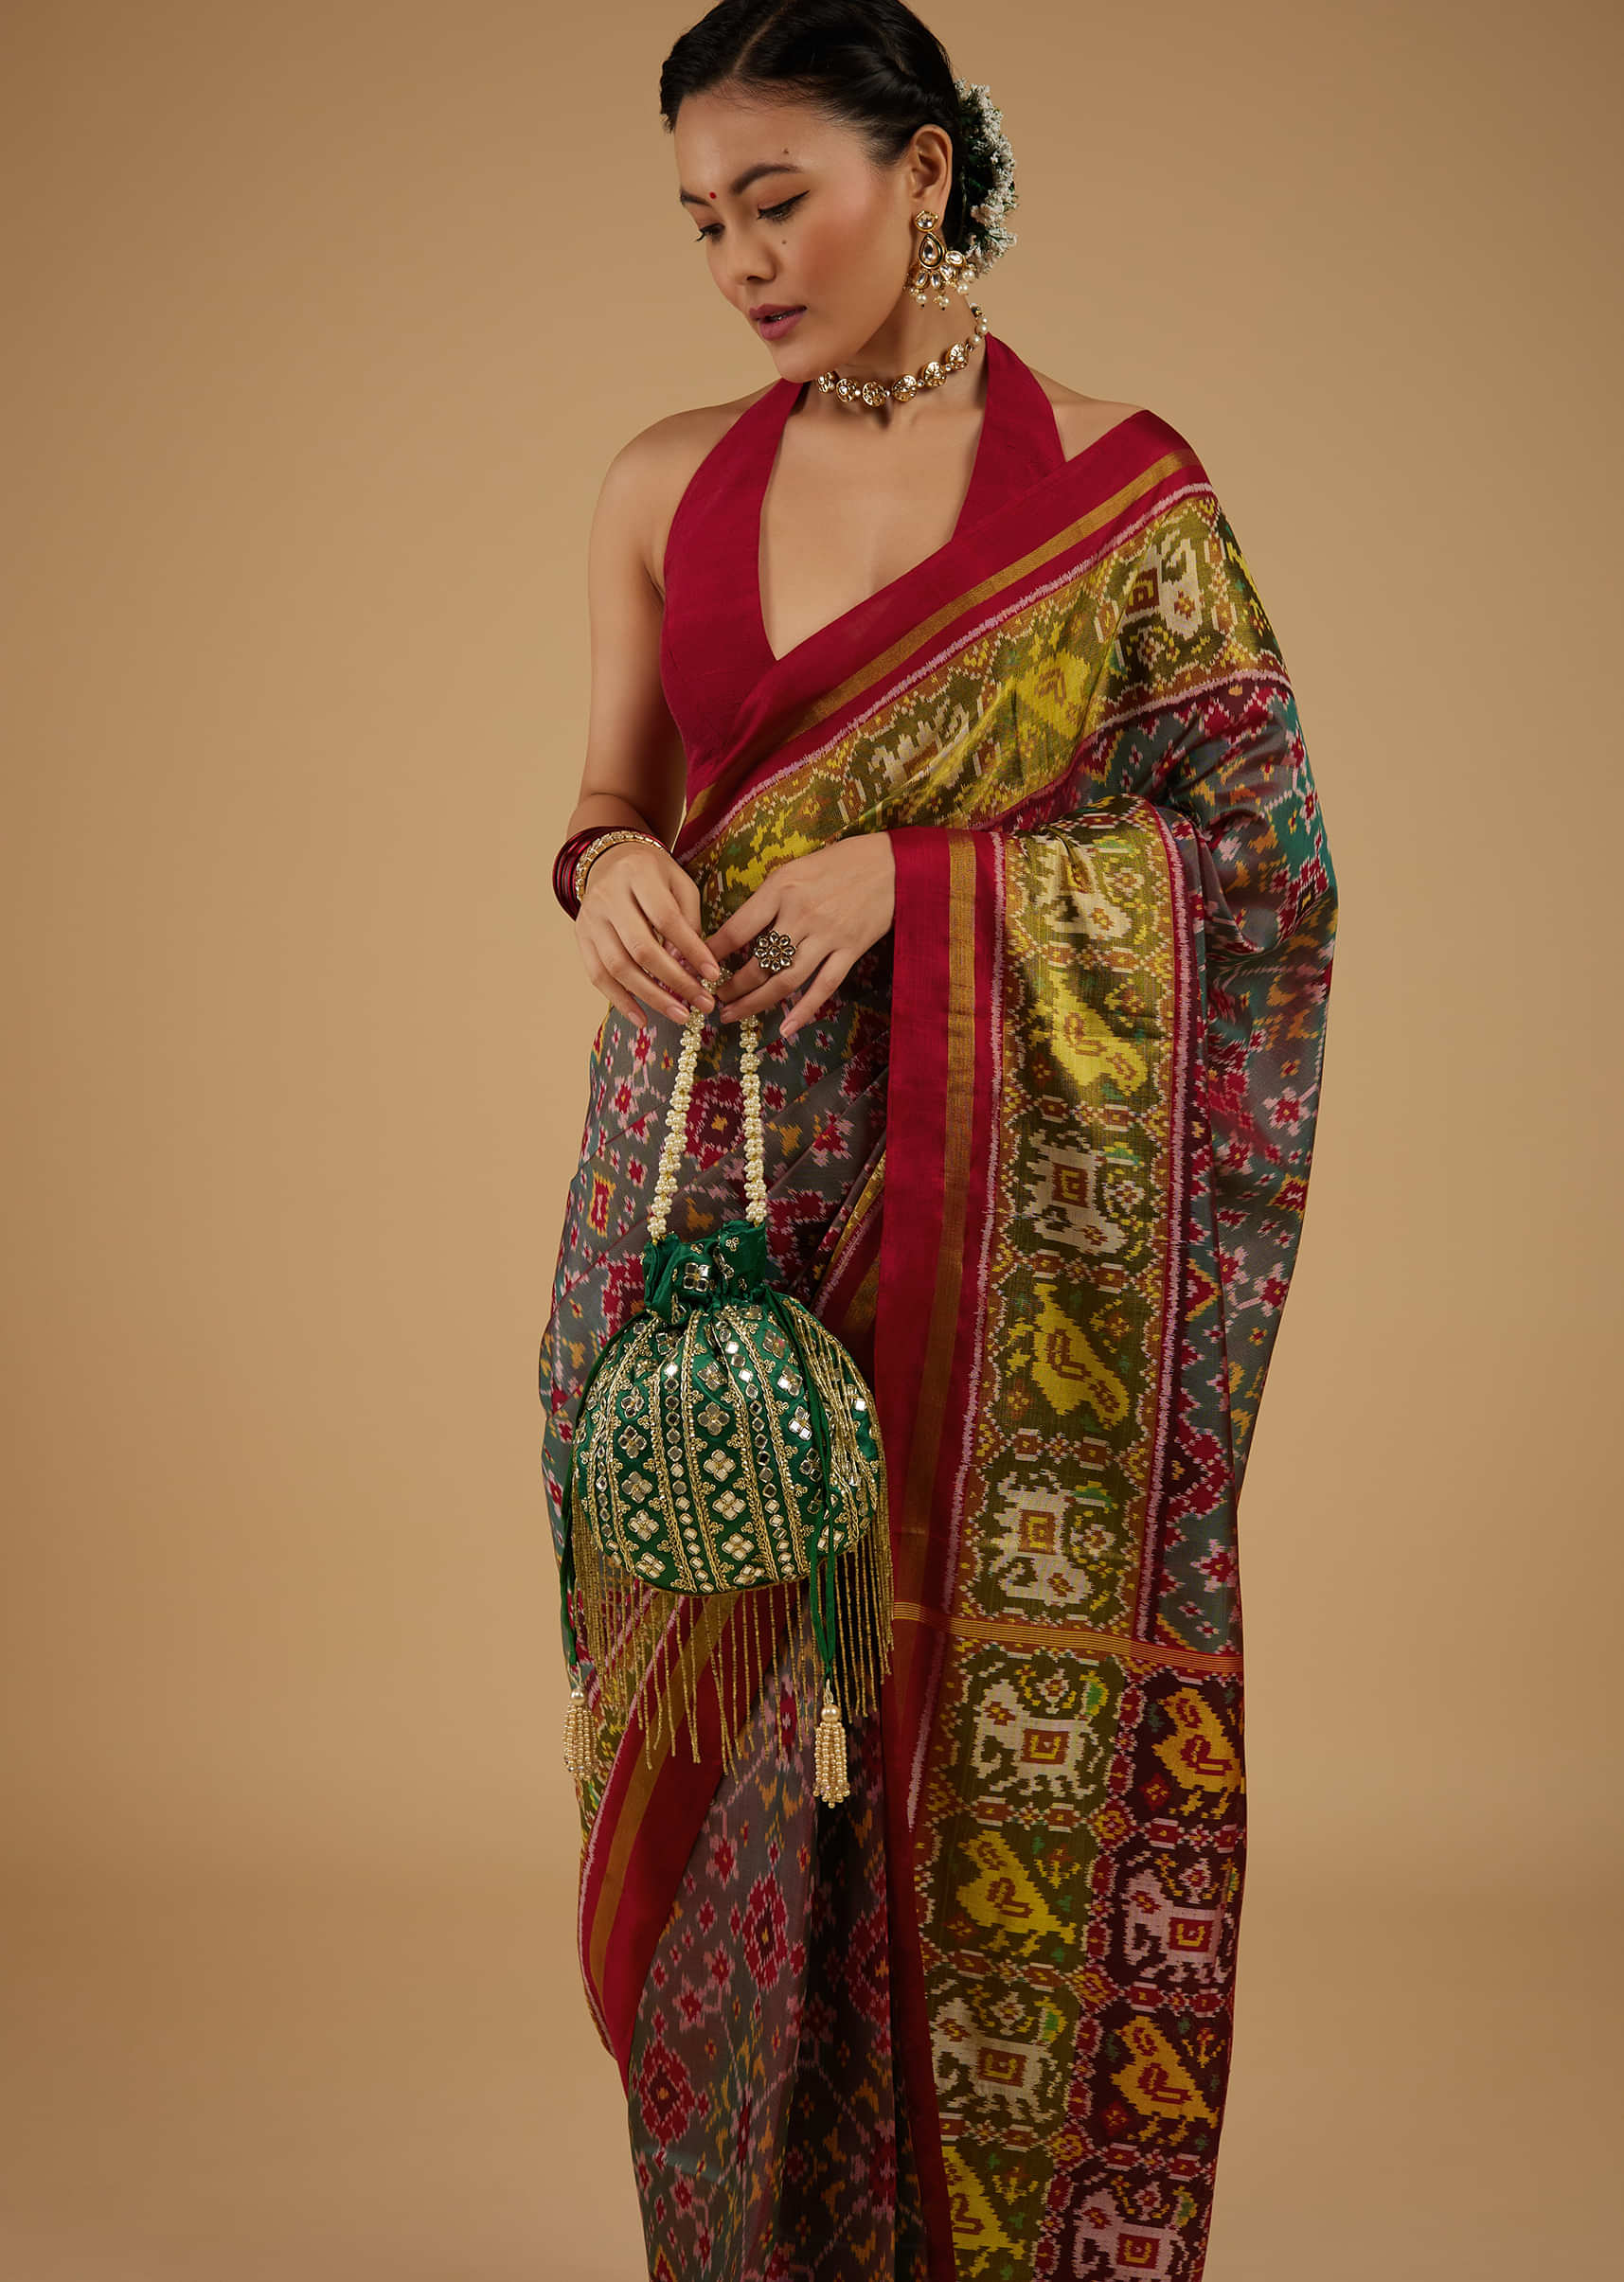 Citrus Green Saree In Silk With Ikat Weave Patola Work